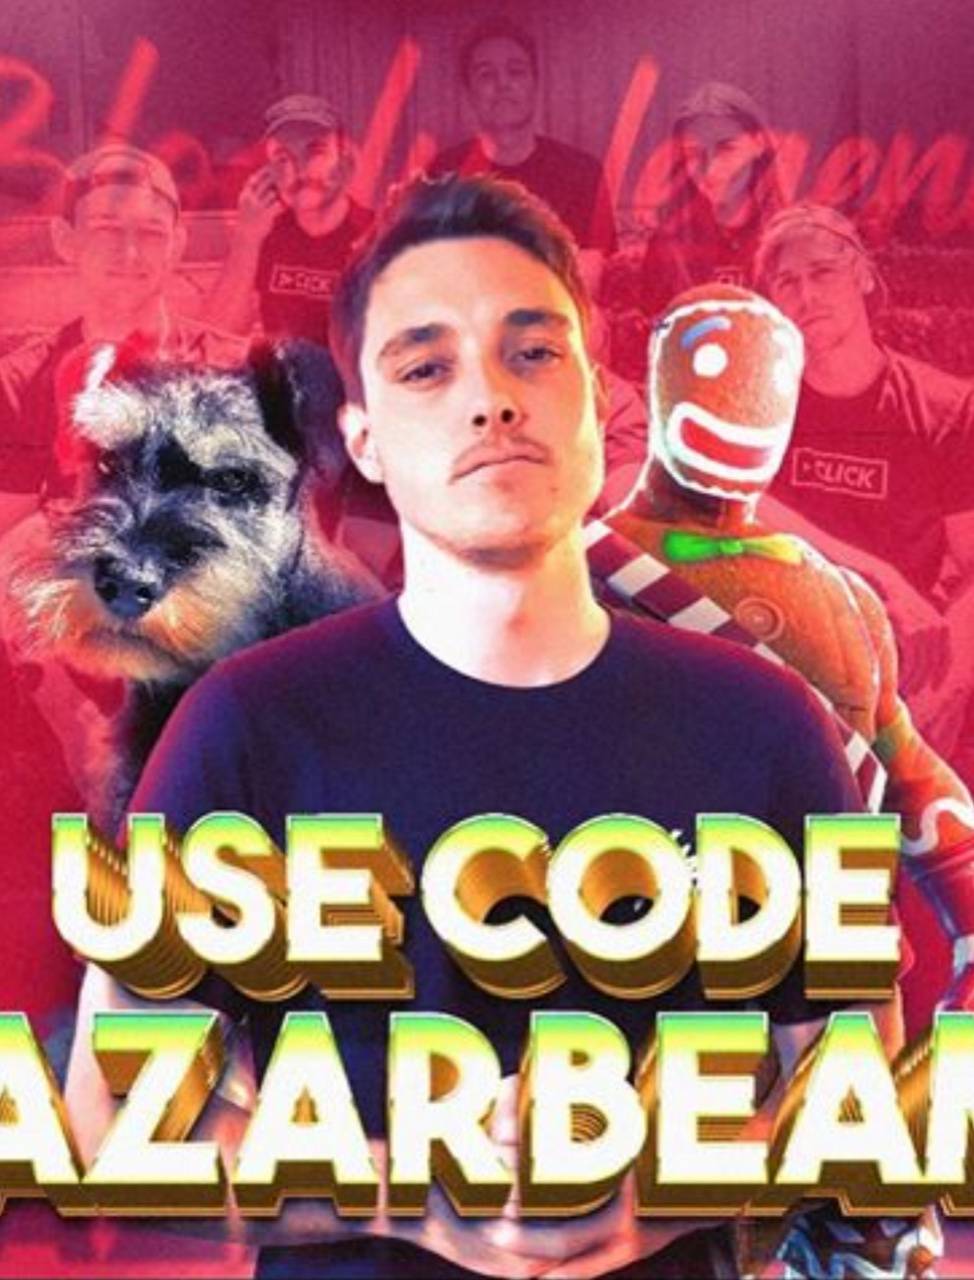 Lazarbeam Wallpapers